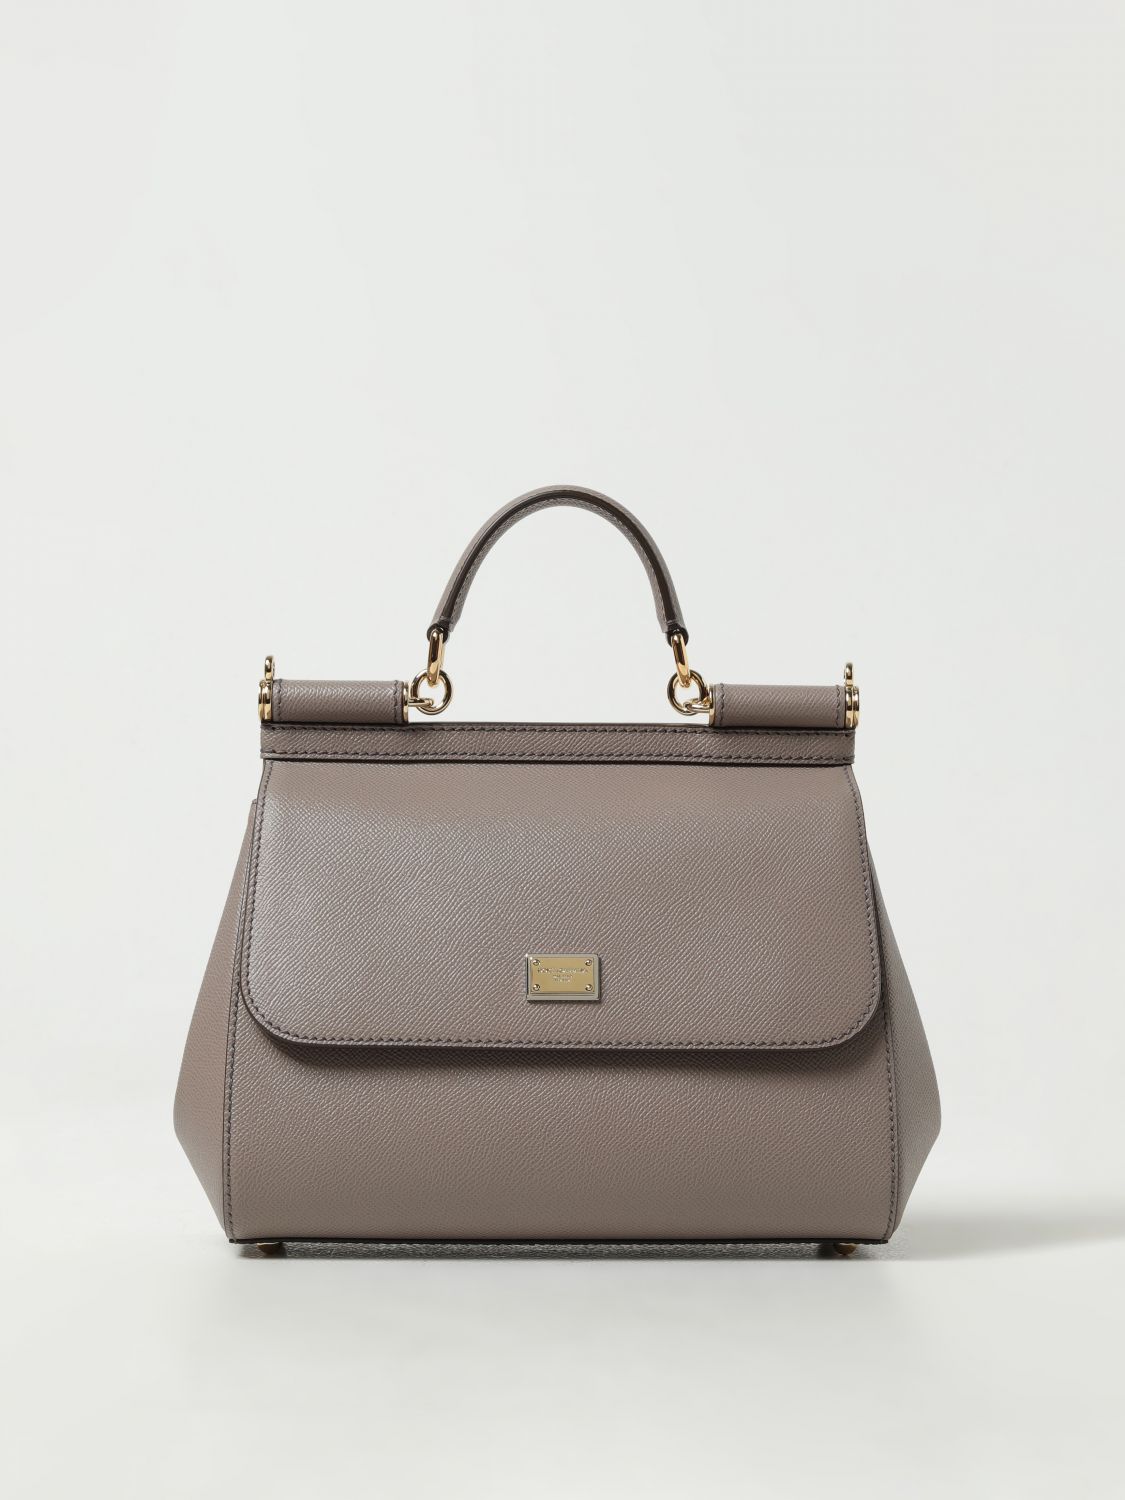 Dolce & Gabbana Sicily Bag In Micro Grained Leather In Beige